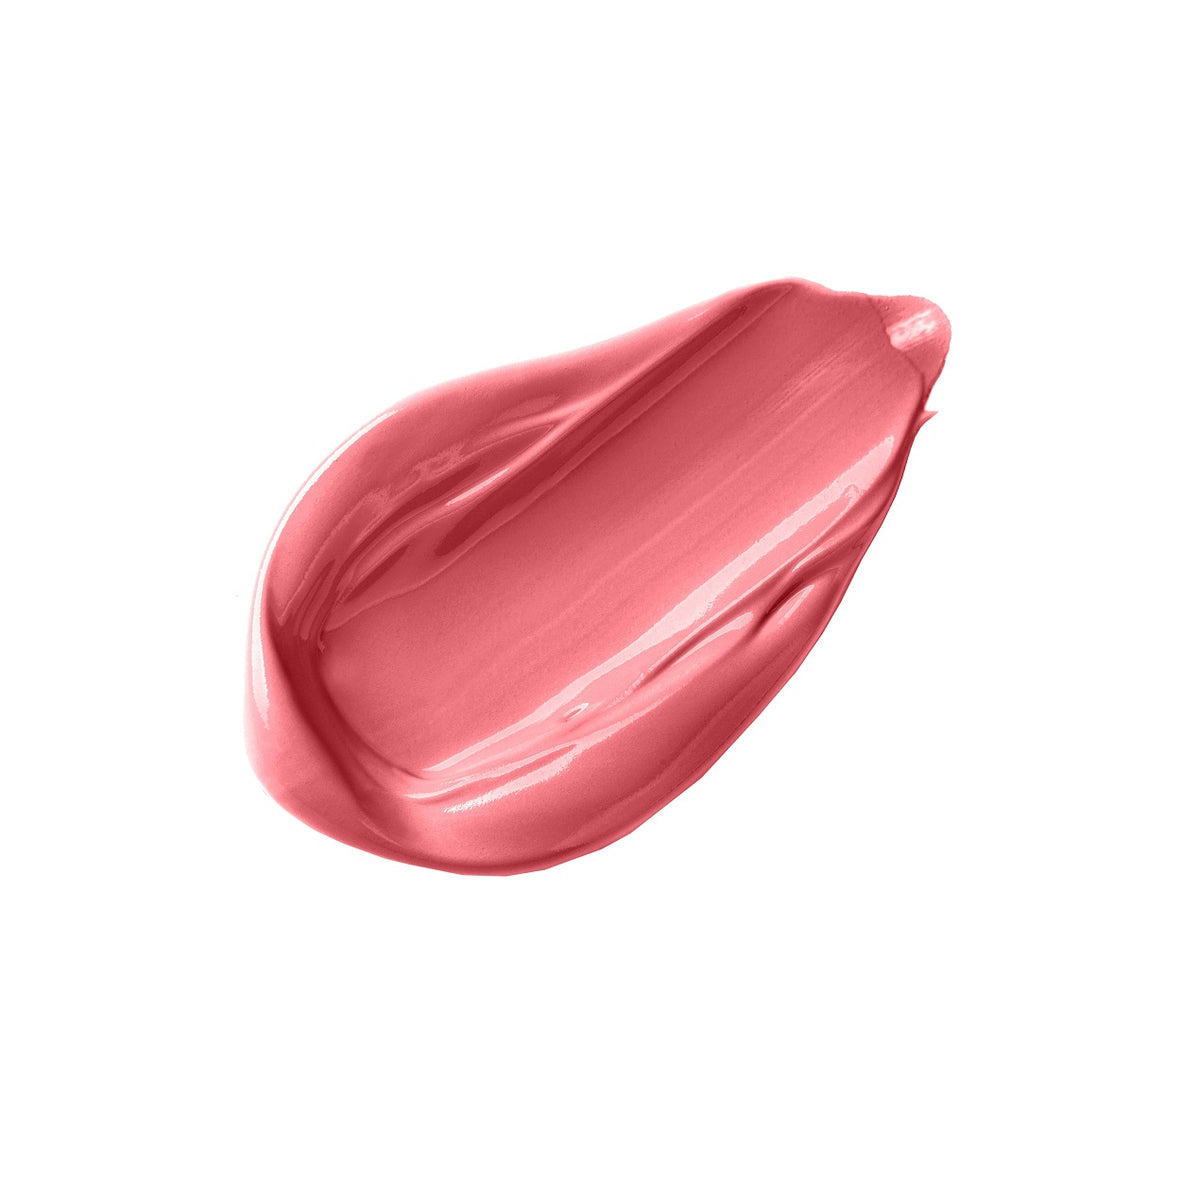 WET N WILD MegaLast High-Shine Lip Color- Rose and Slay